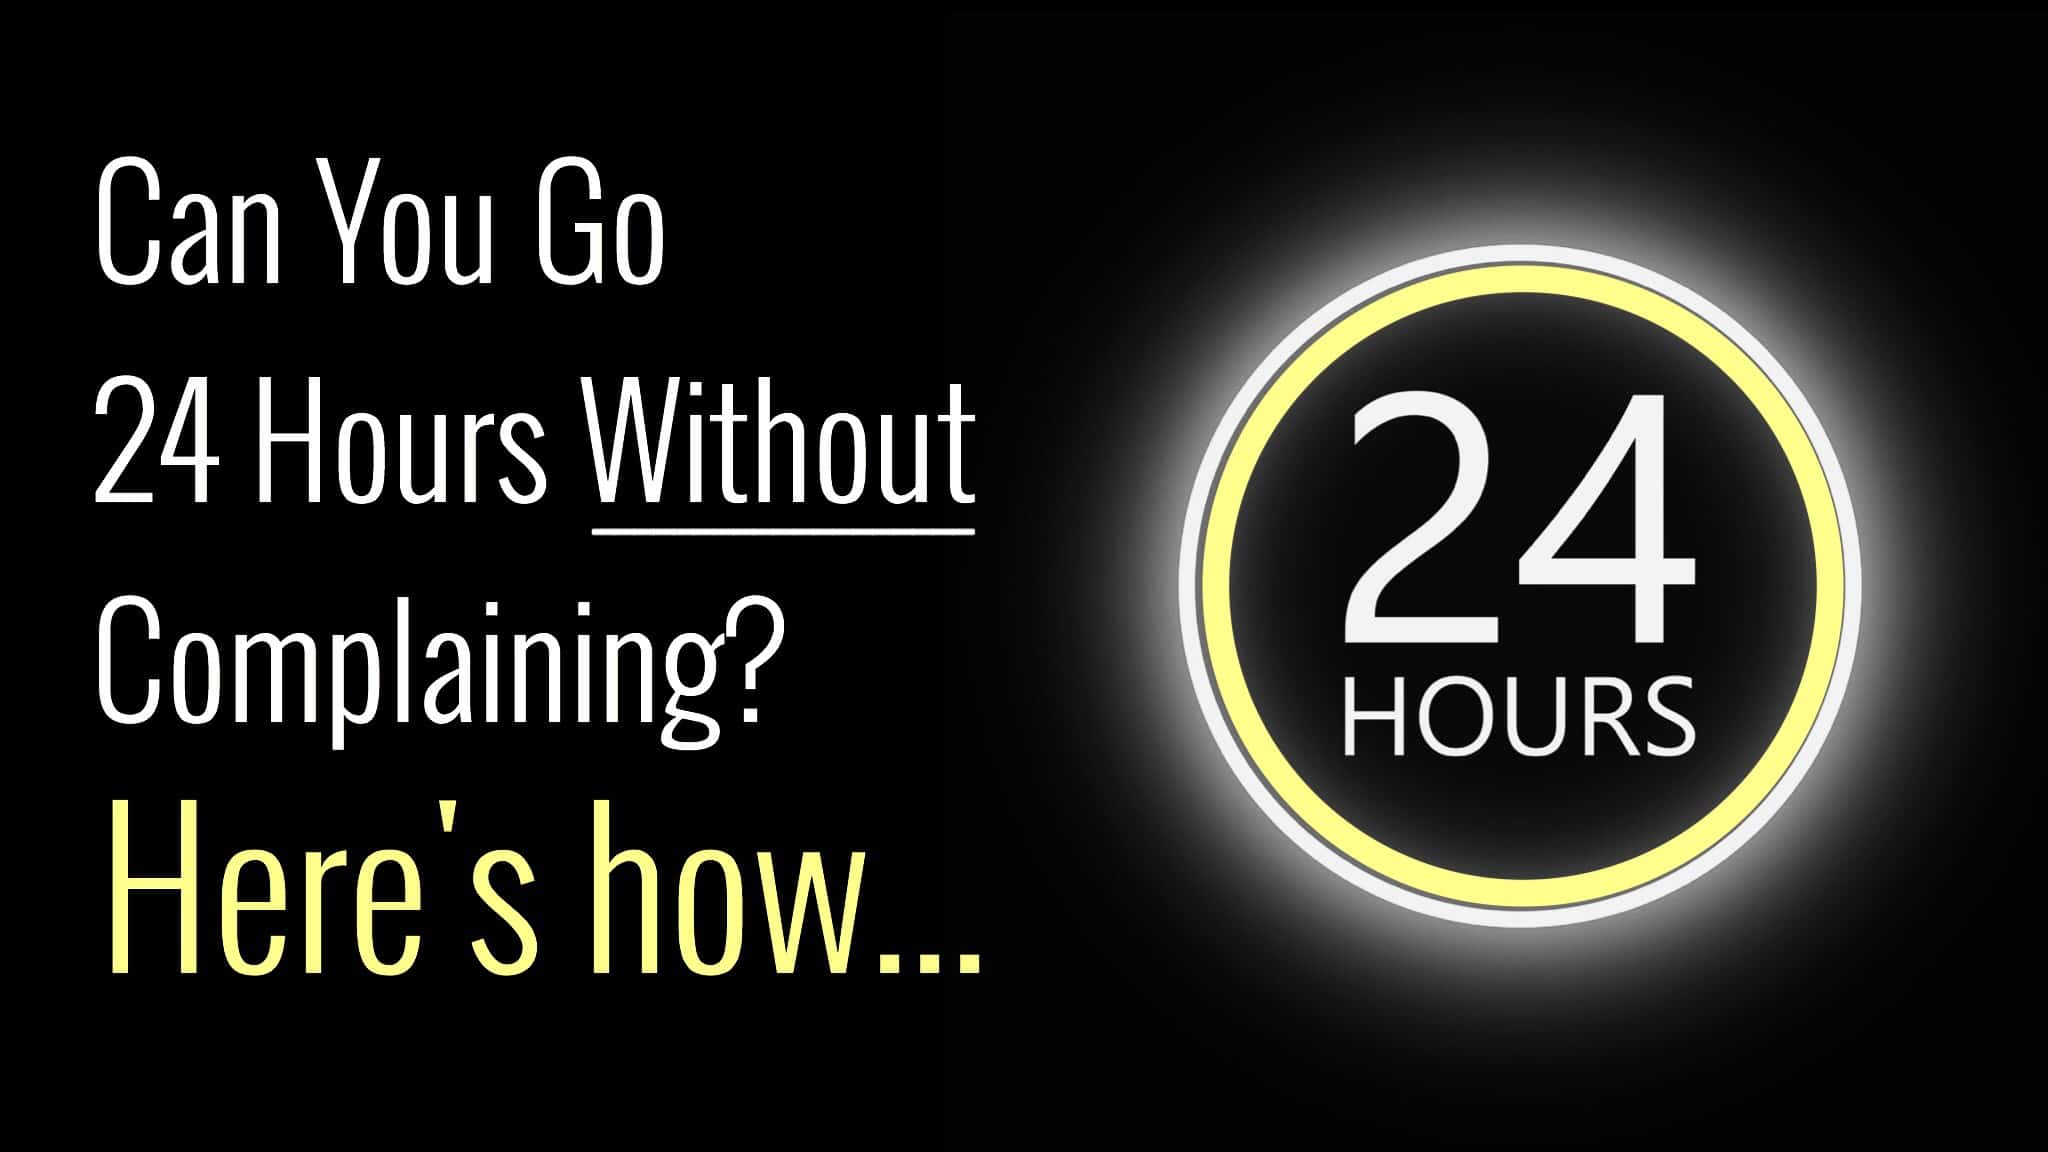 24 hours without complaining